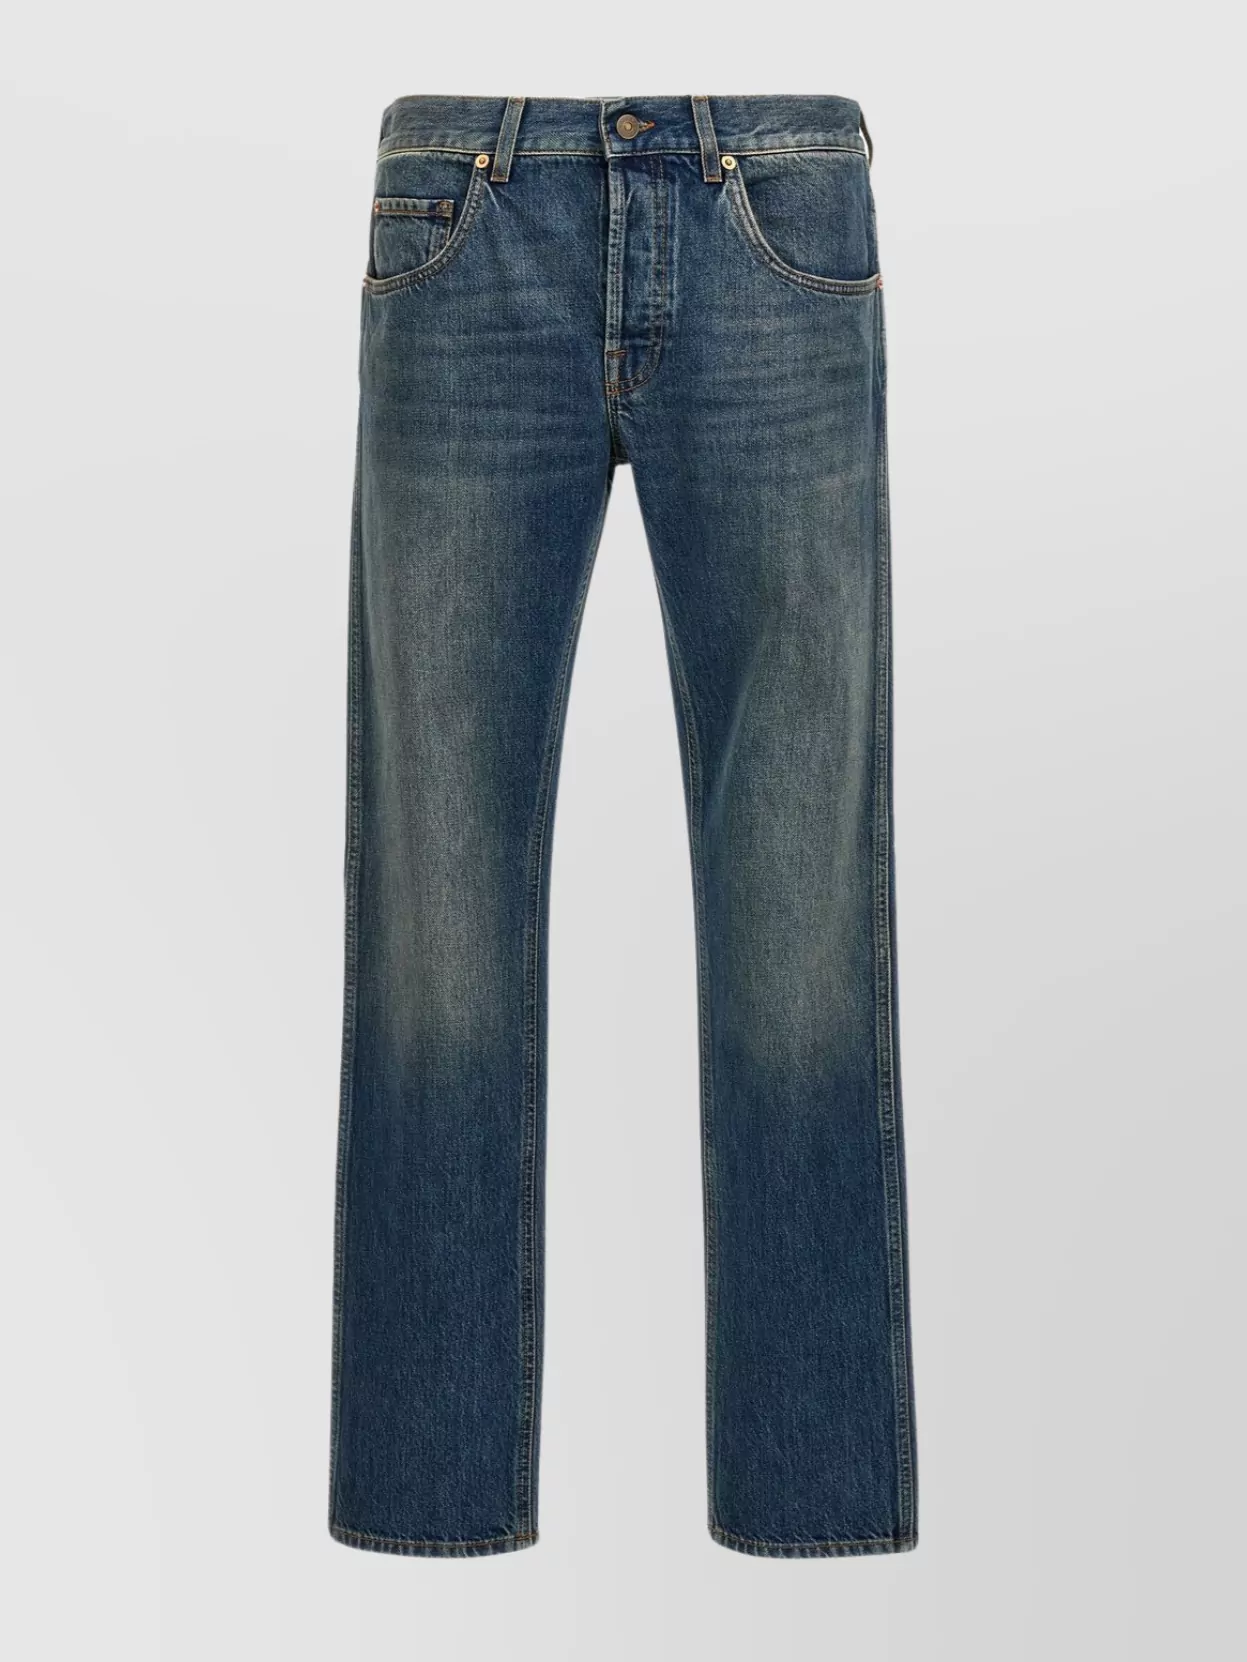 Shop Gucci 'modern Tapered' Jeans Featuring Contrast Stitching